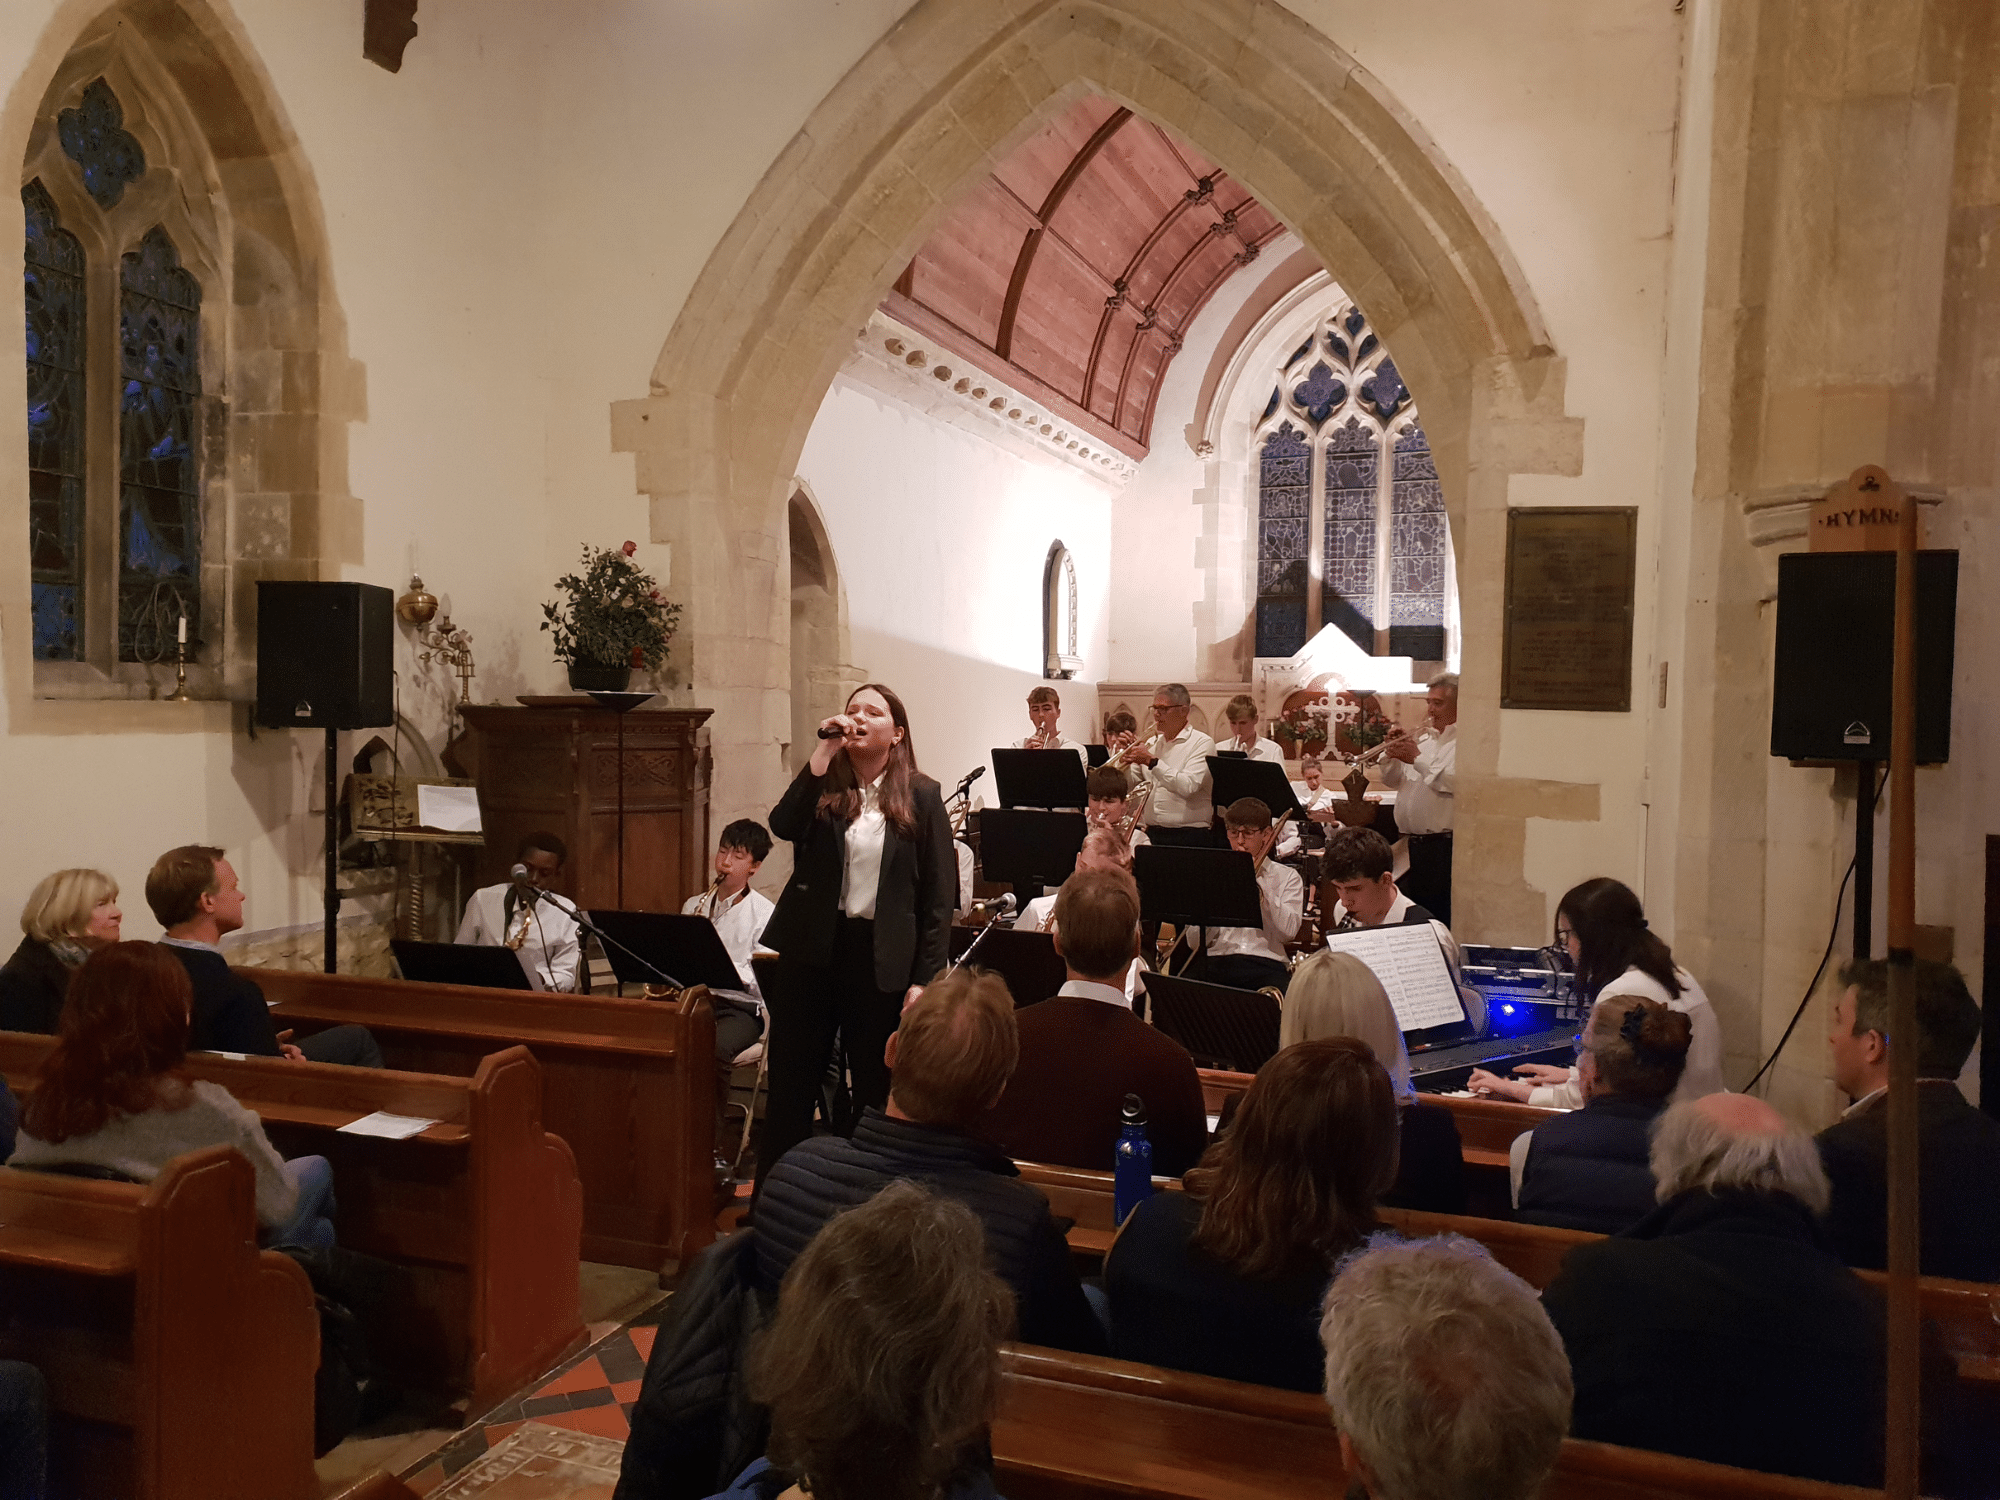 Student sings with school big band in Whitwell church